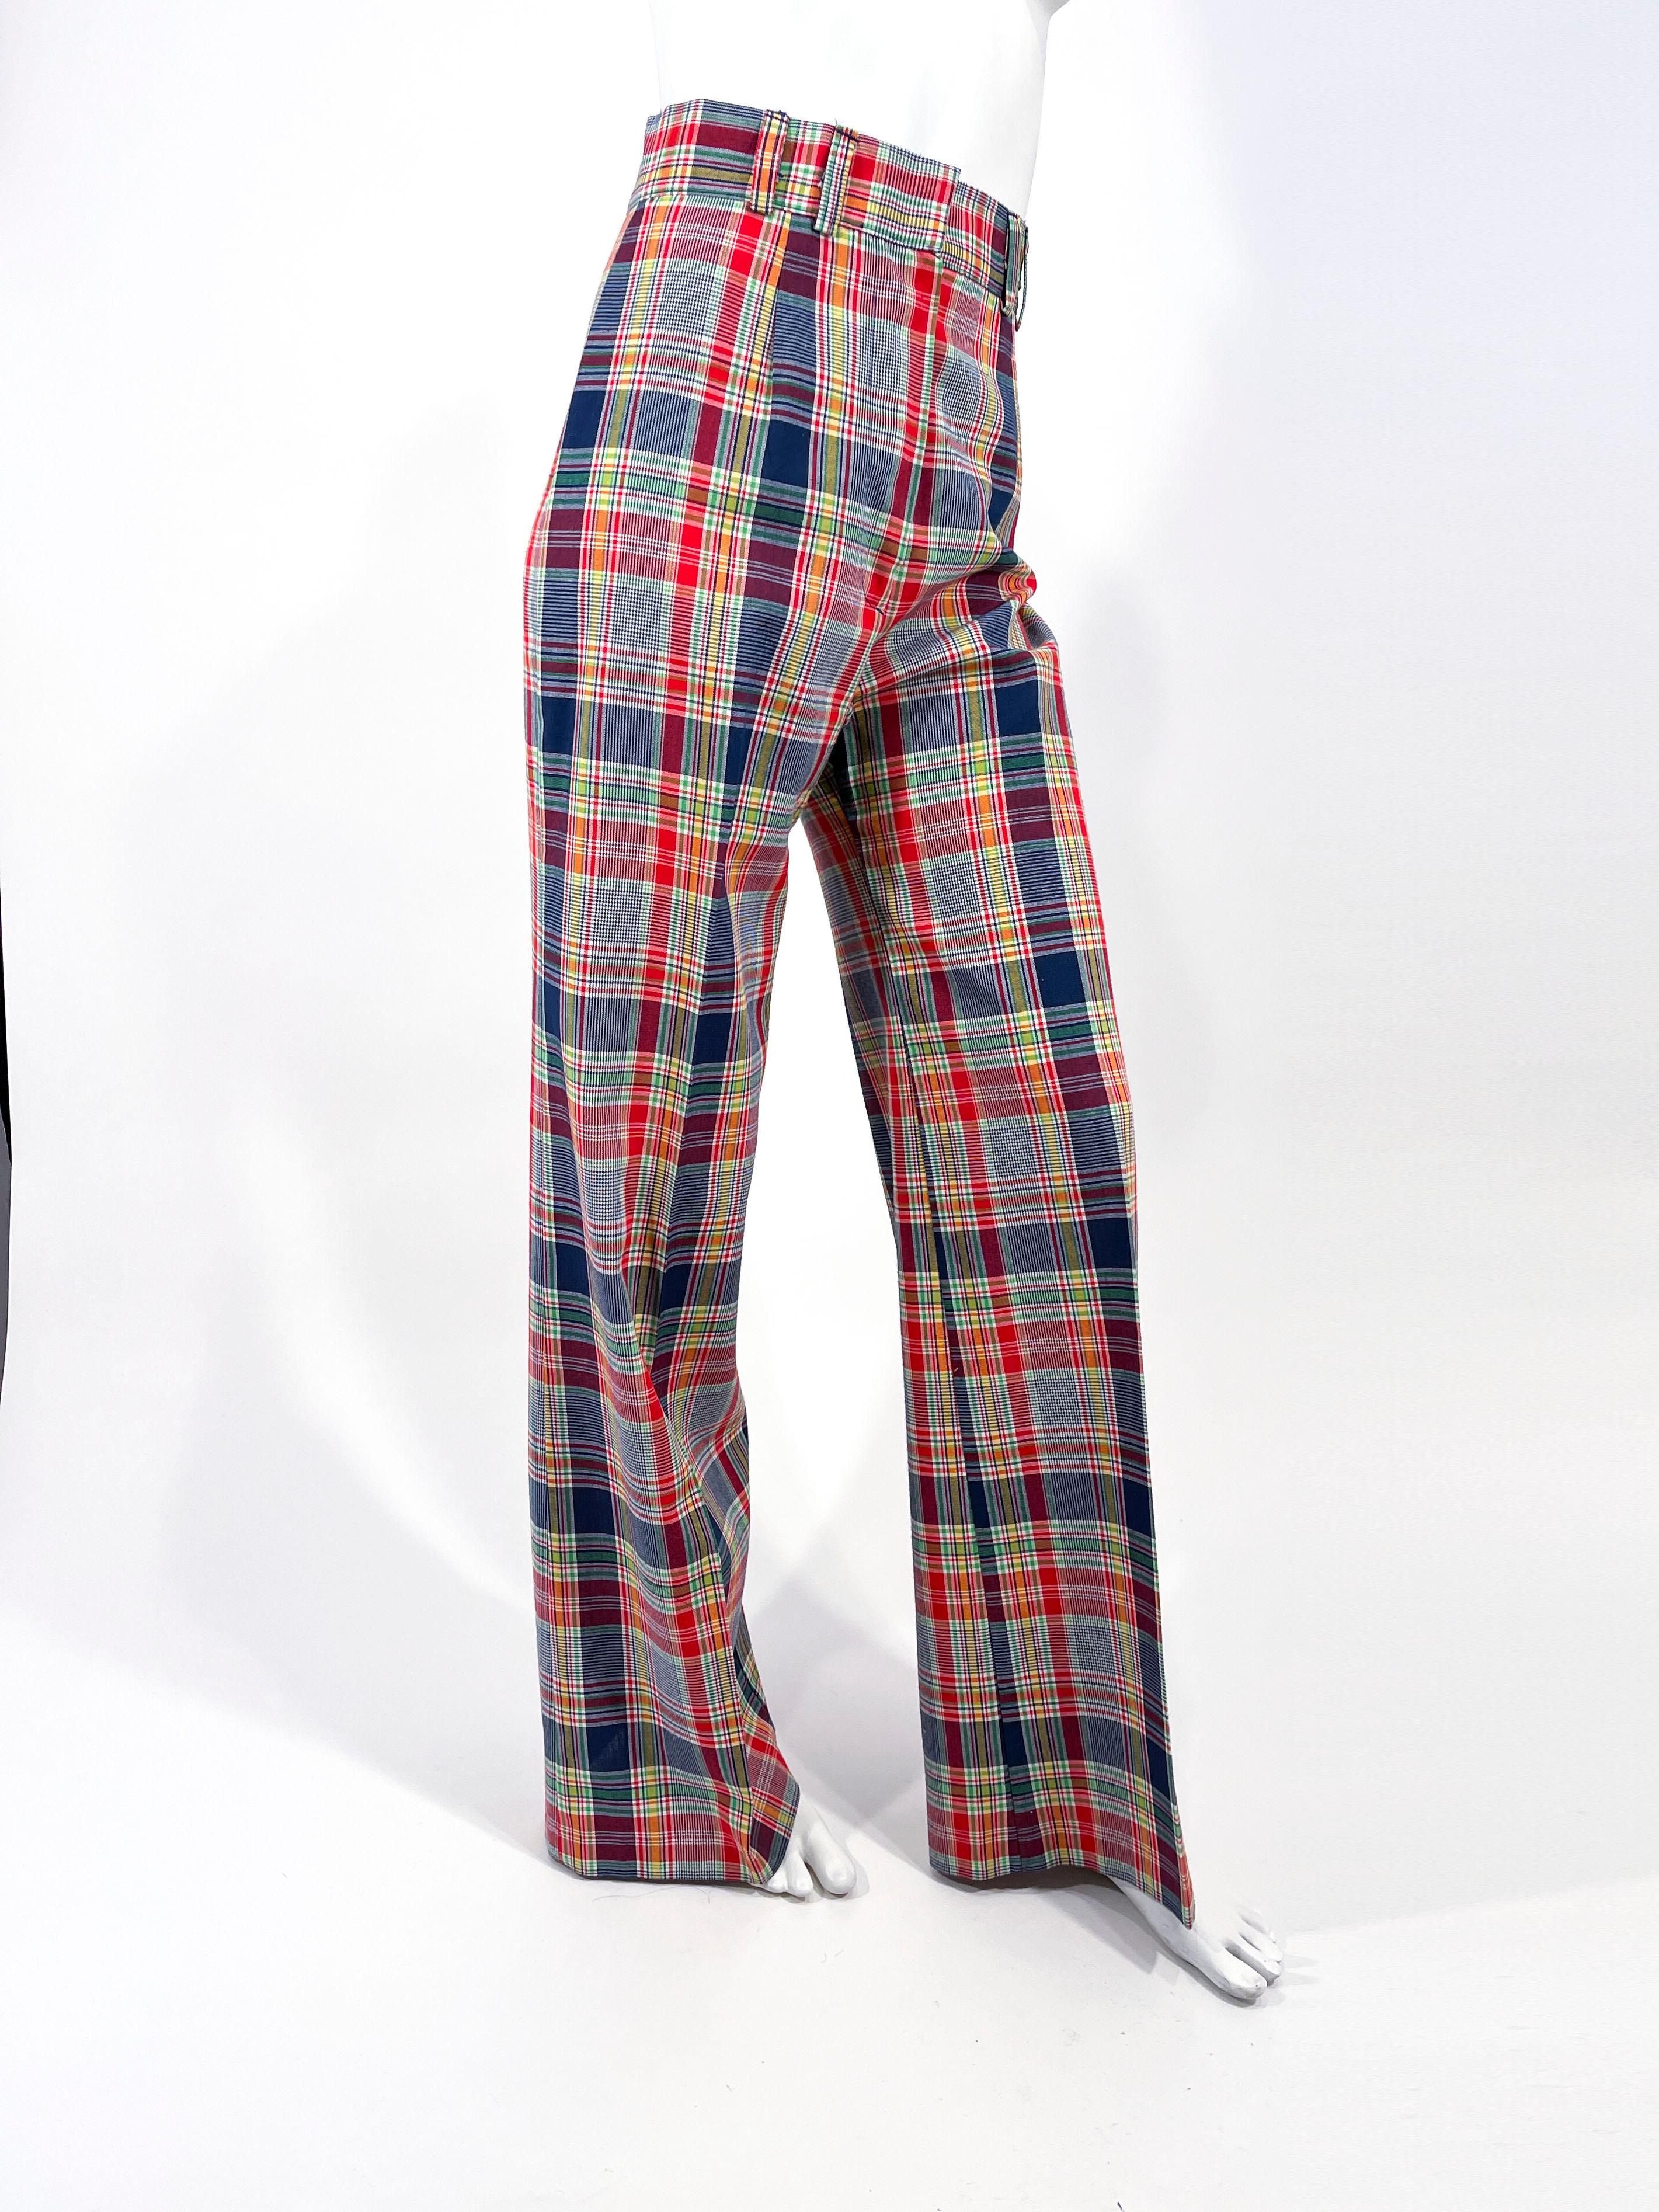 1970s Plaid Multi-colored Plaid Wide Legged Pants. The plaid features navy, yellow, green, and white. The high waist on these pants have matching belt loops. They are unlined and have a permanent pressed pleats to compliment the wide legs.